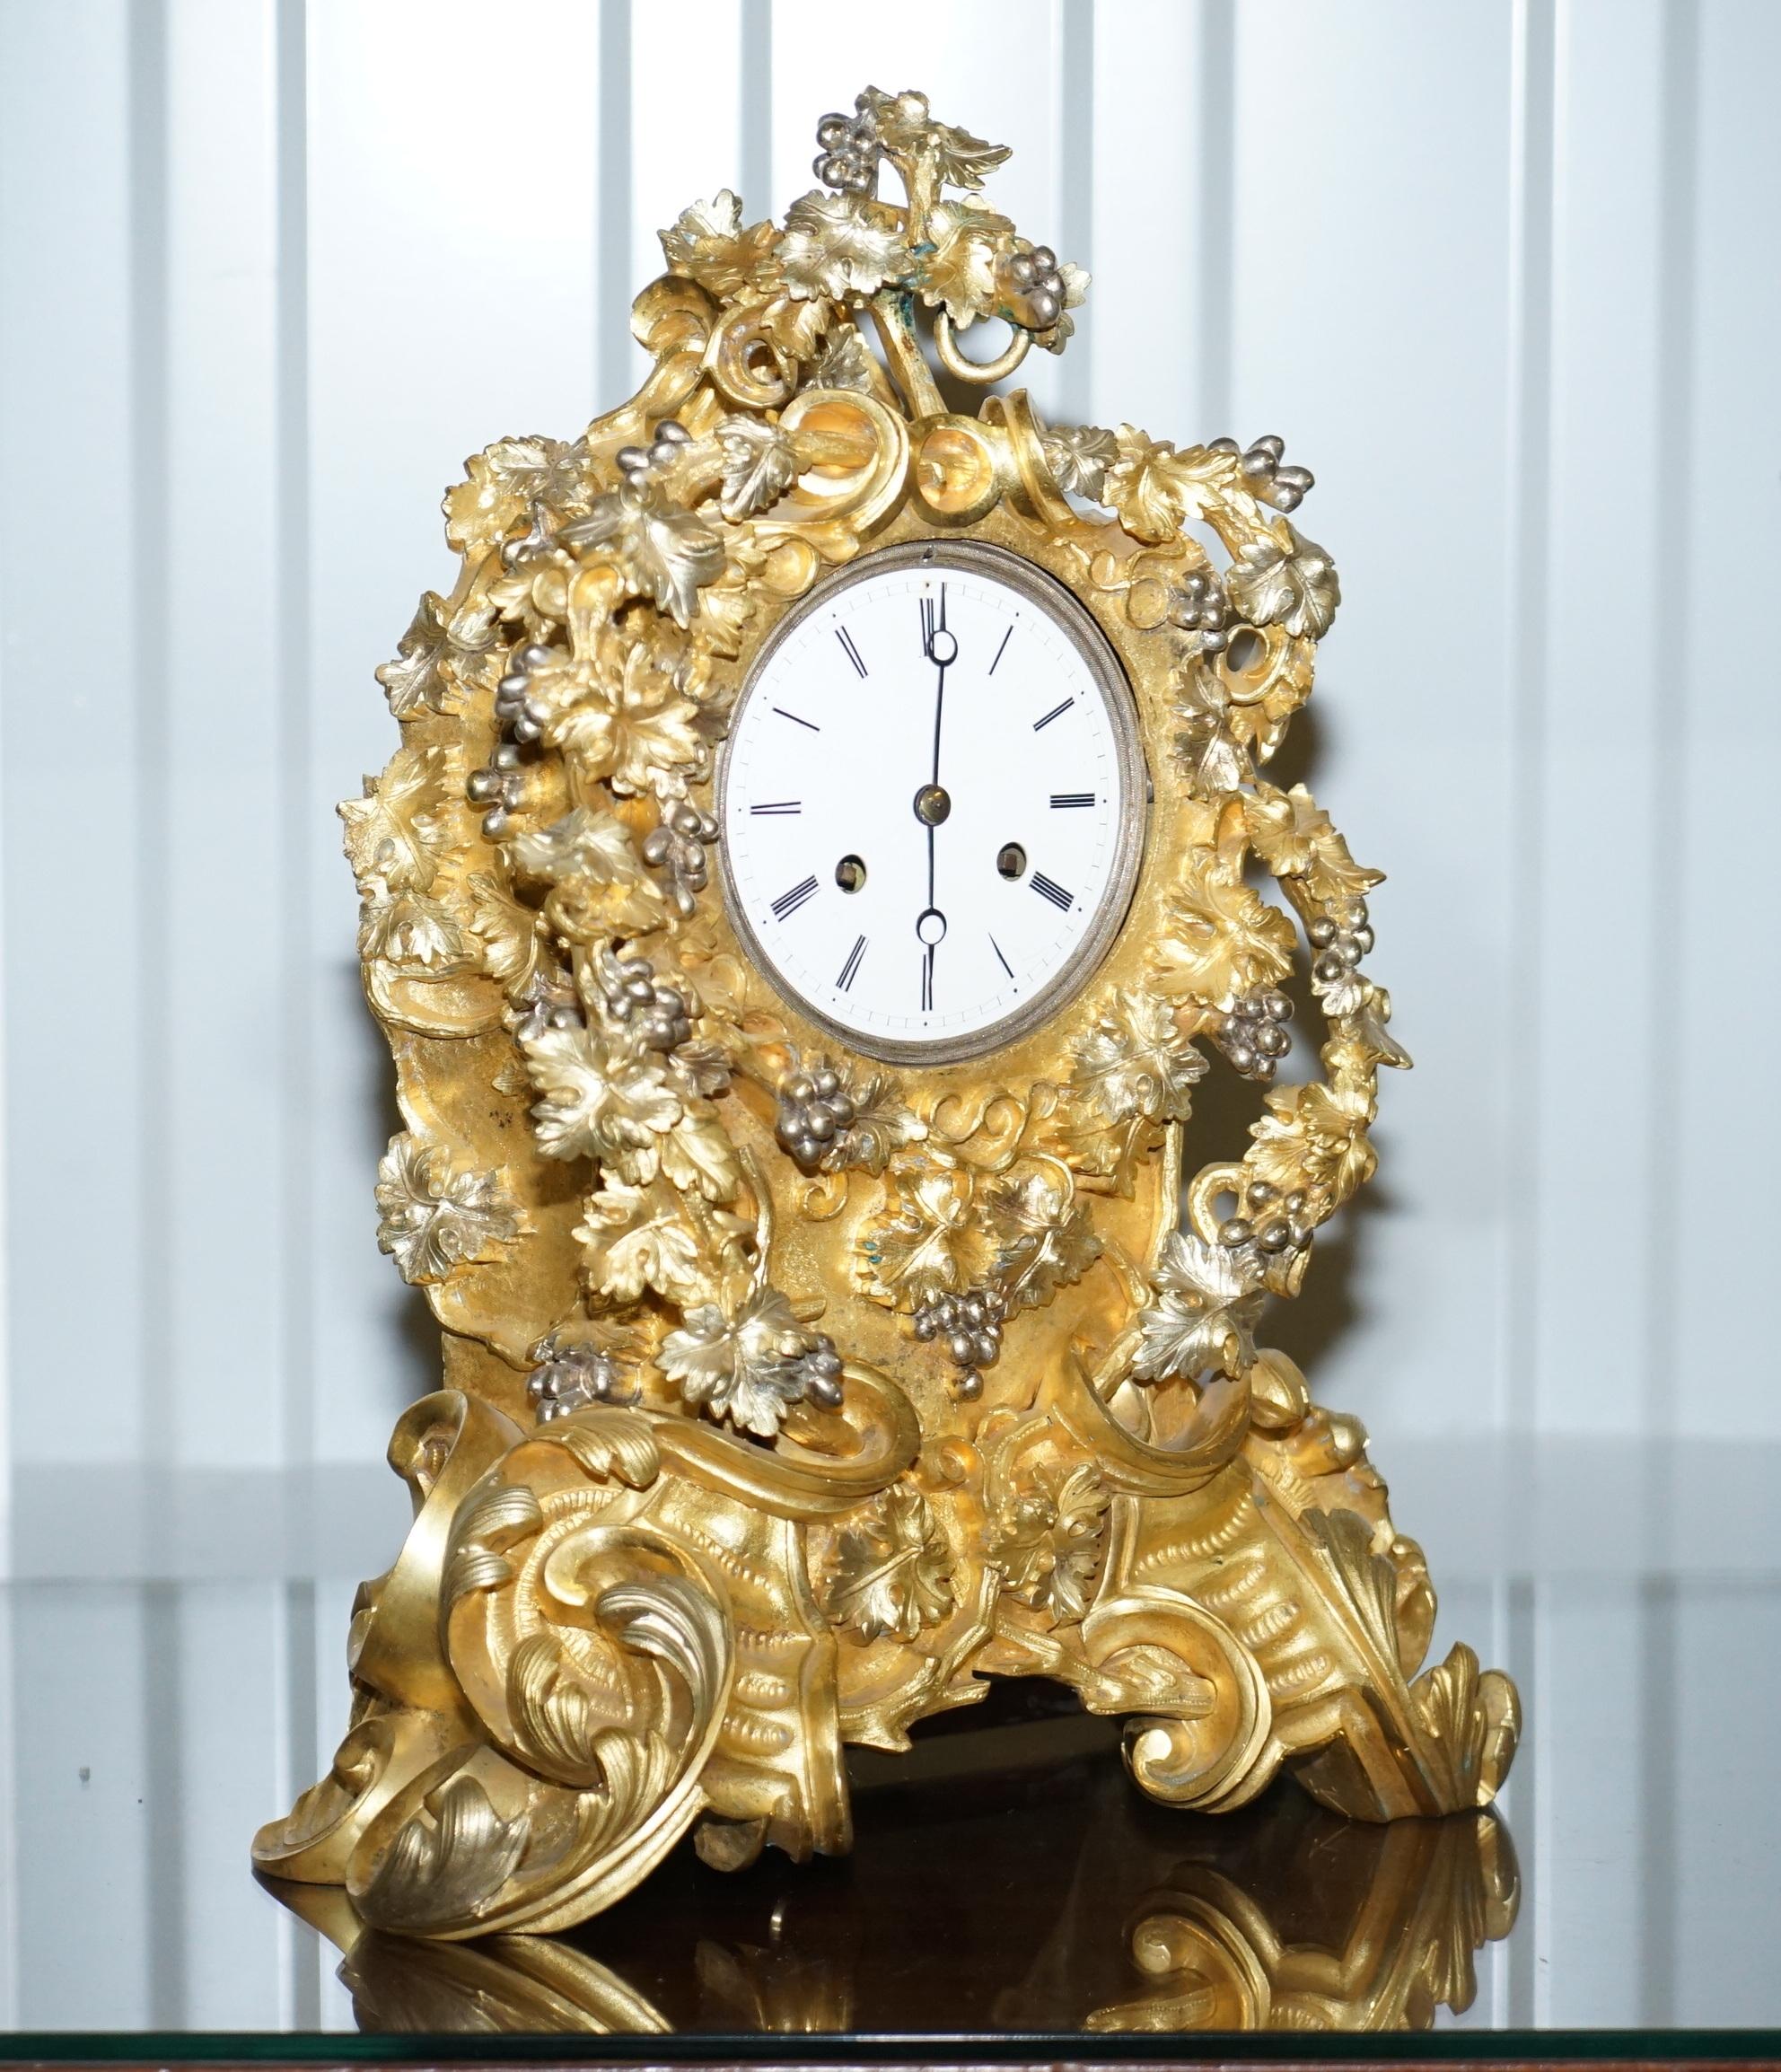 We are delighted to offer for sale this lovely handmade in France circa 1860 very decorative gold gilt bronze mantel (fireplace) clock

This is a very heavy beautifully cast mantel (fireplace) clock with ornate frame, its decorated from head to